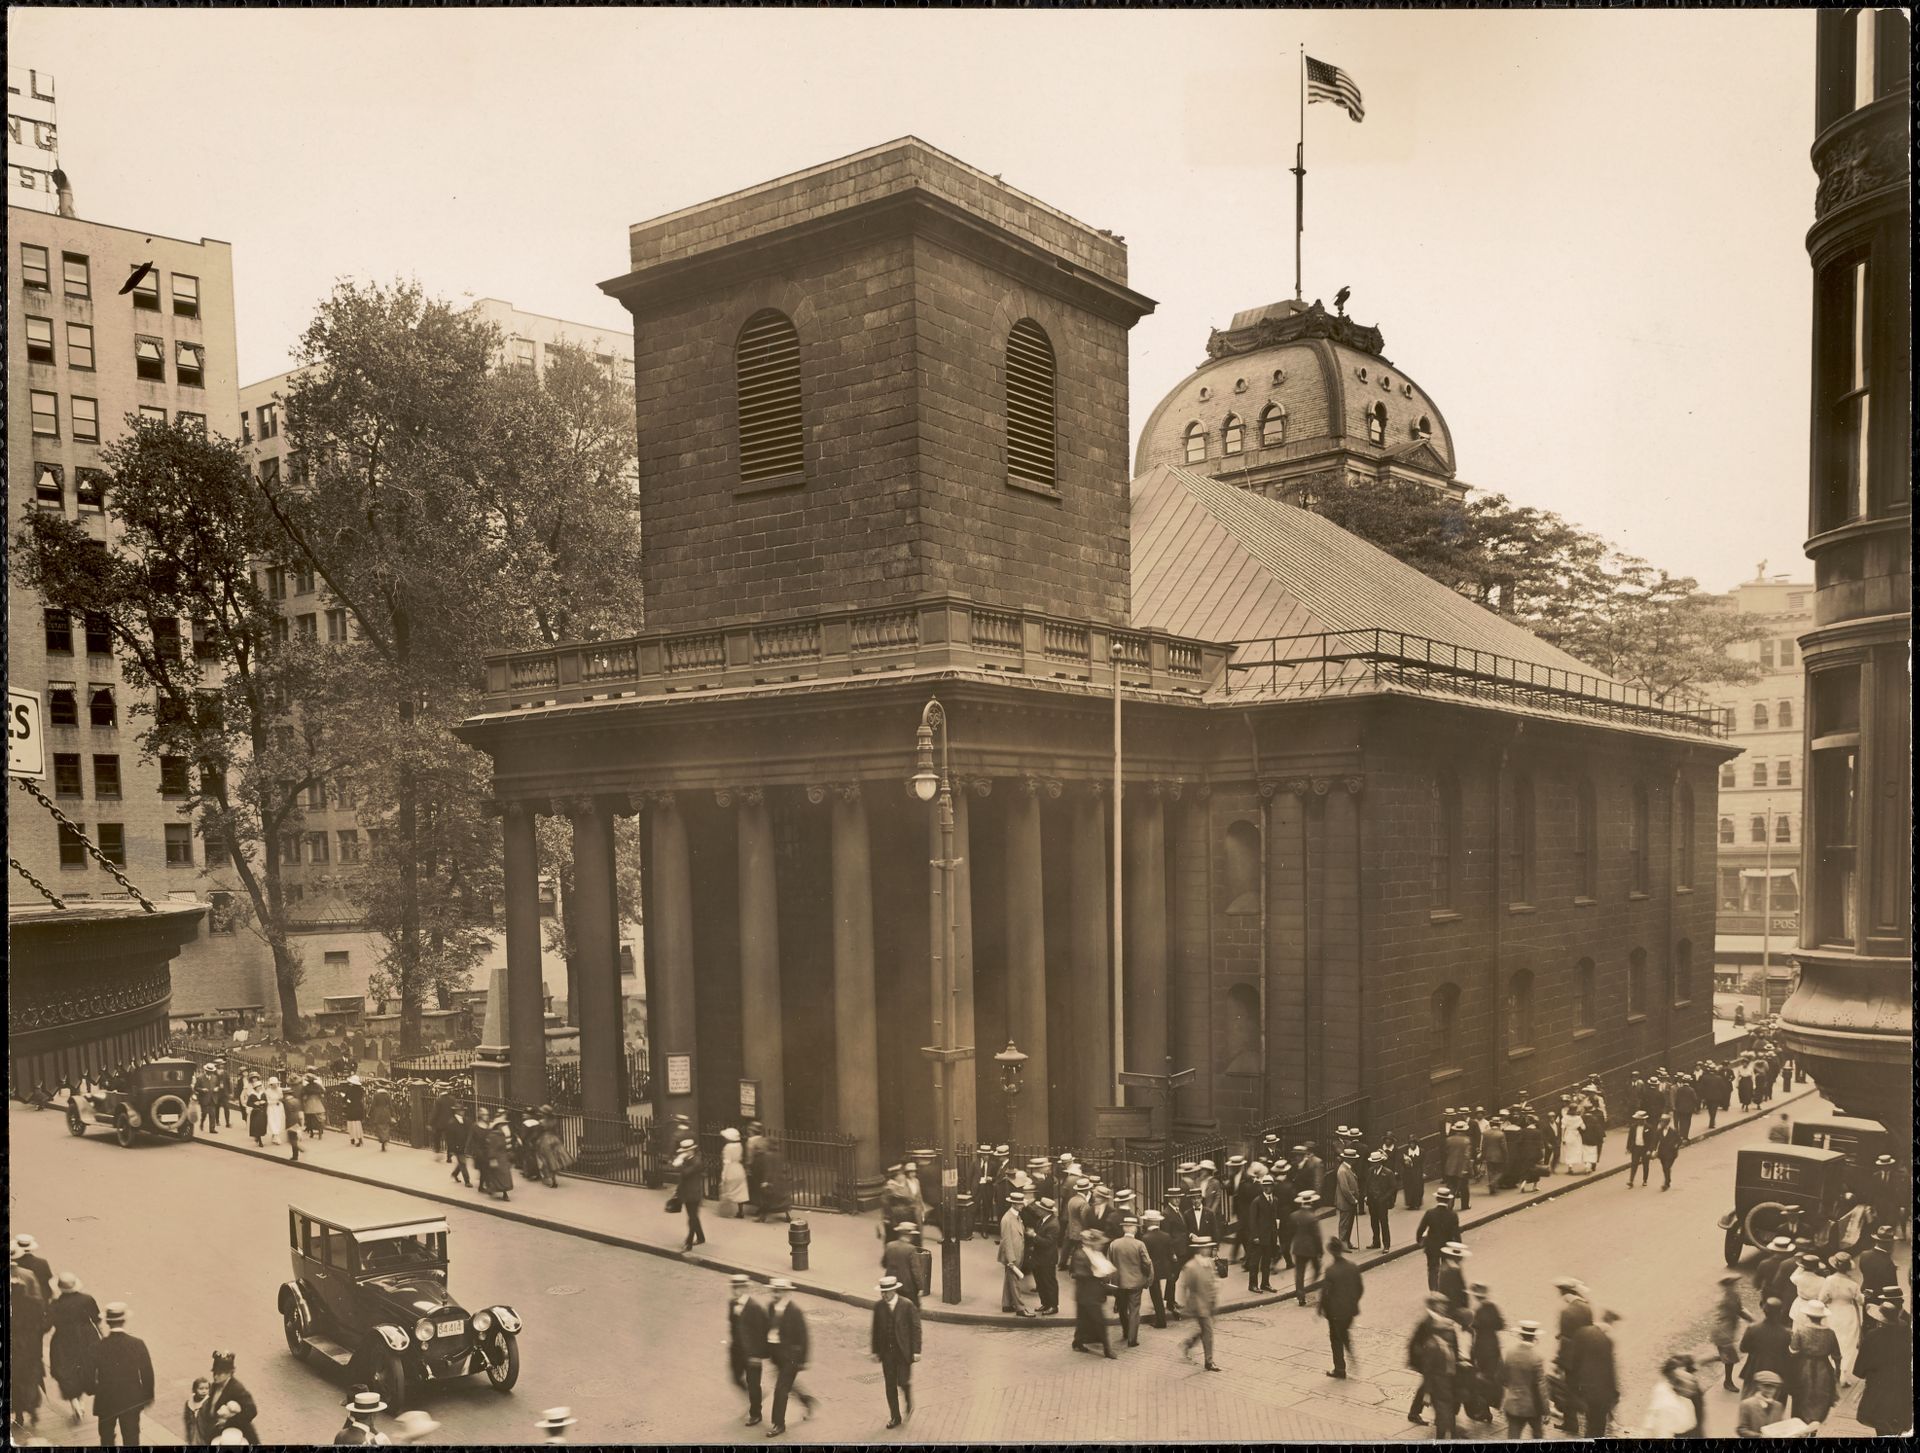 King's Chapel and busy School Street in 1920